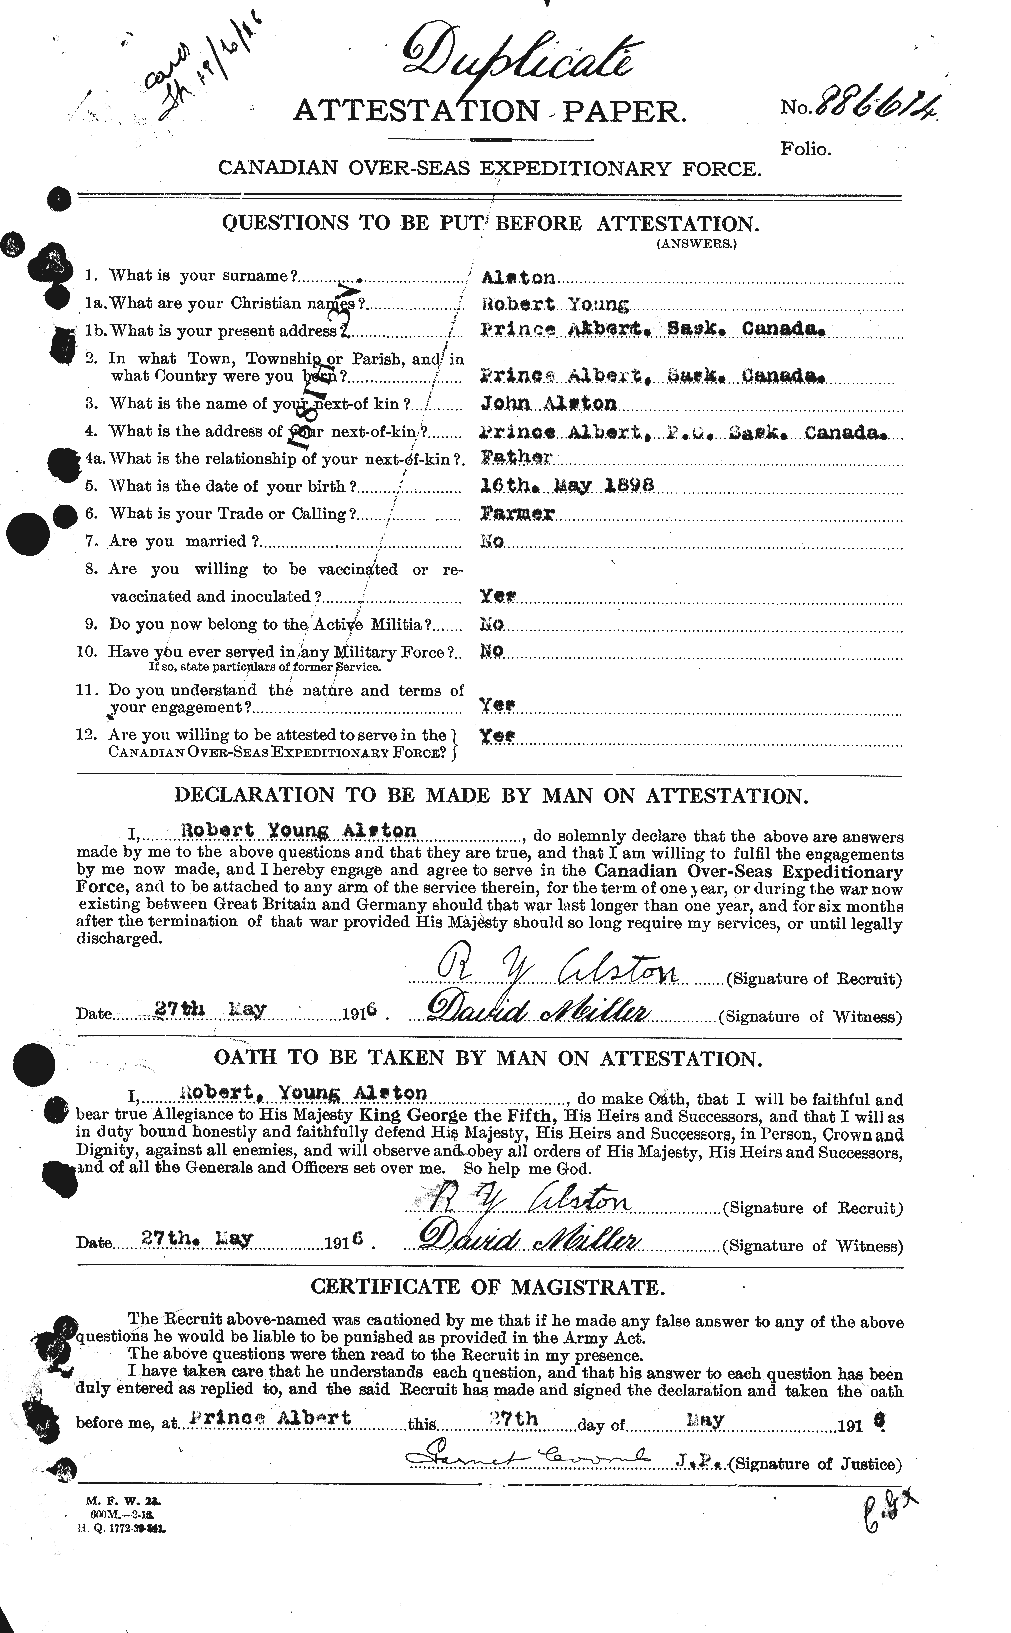 Personnel Records of the First World War - CEF 208162a